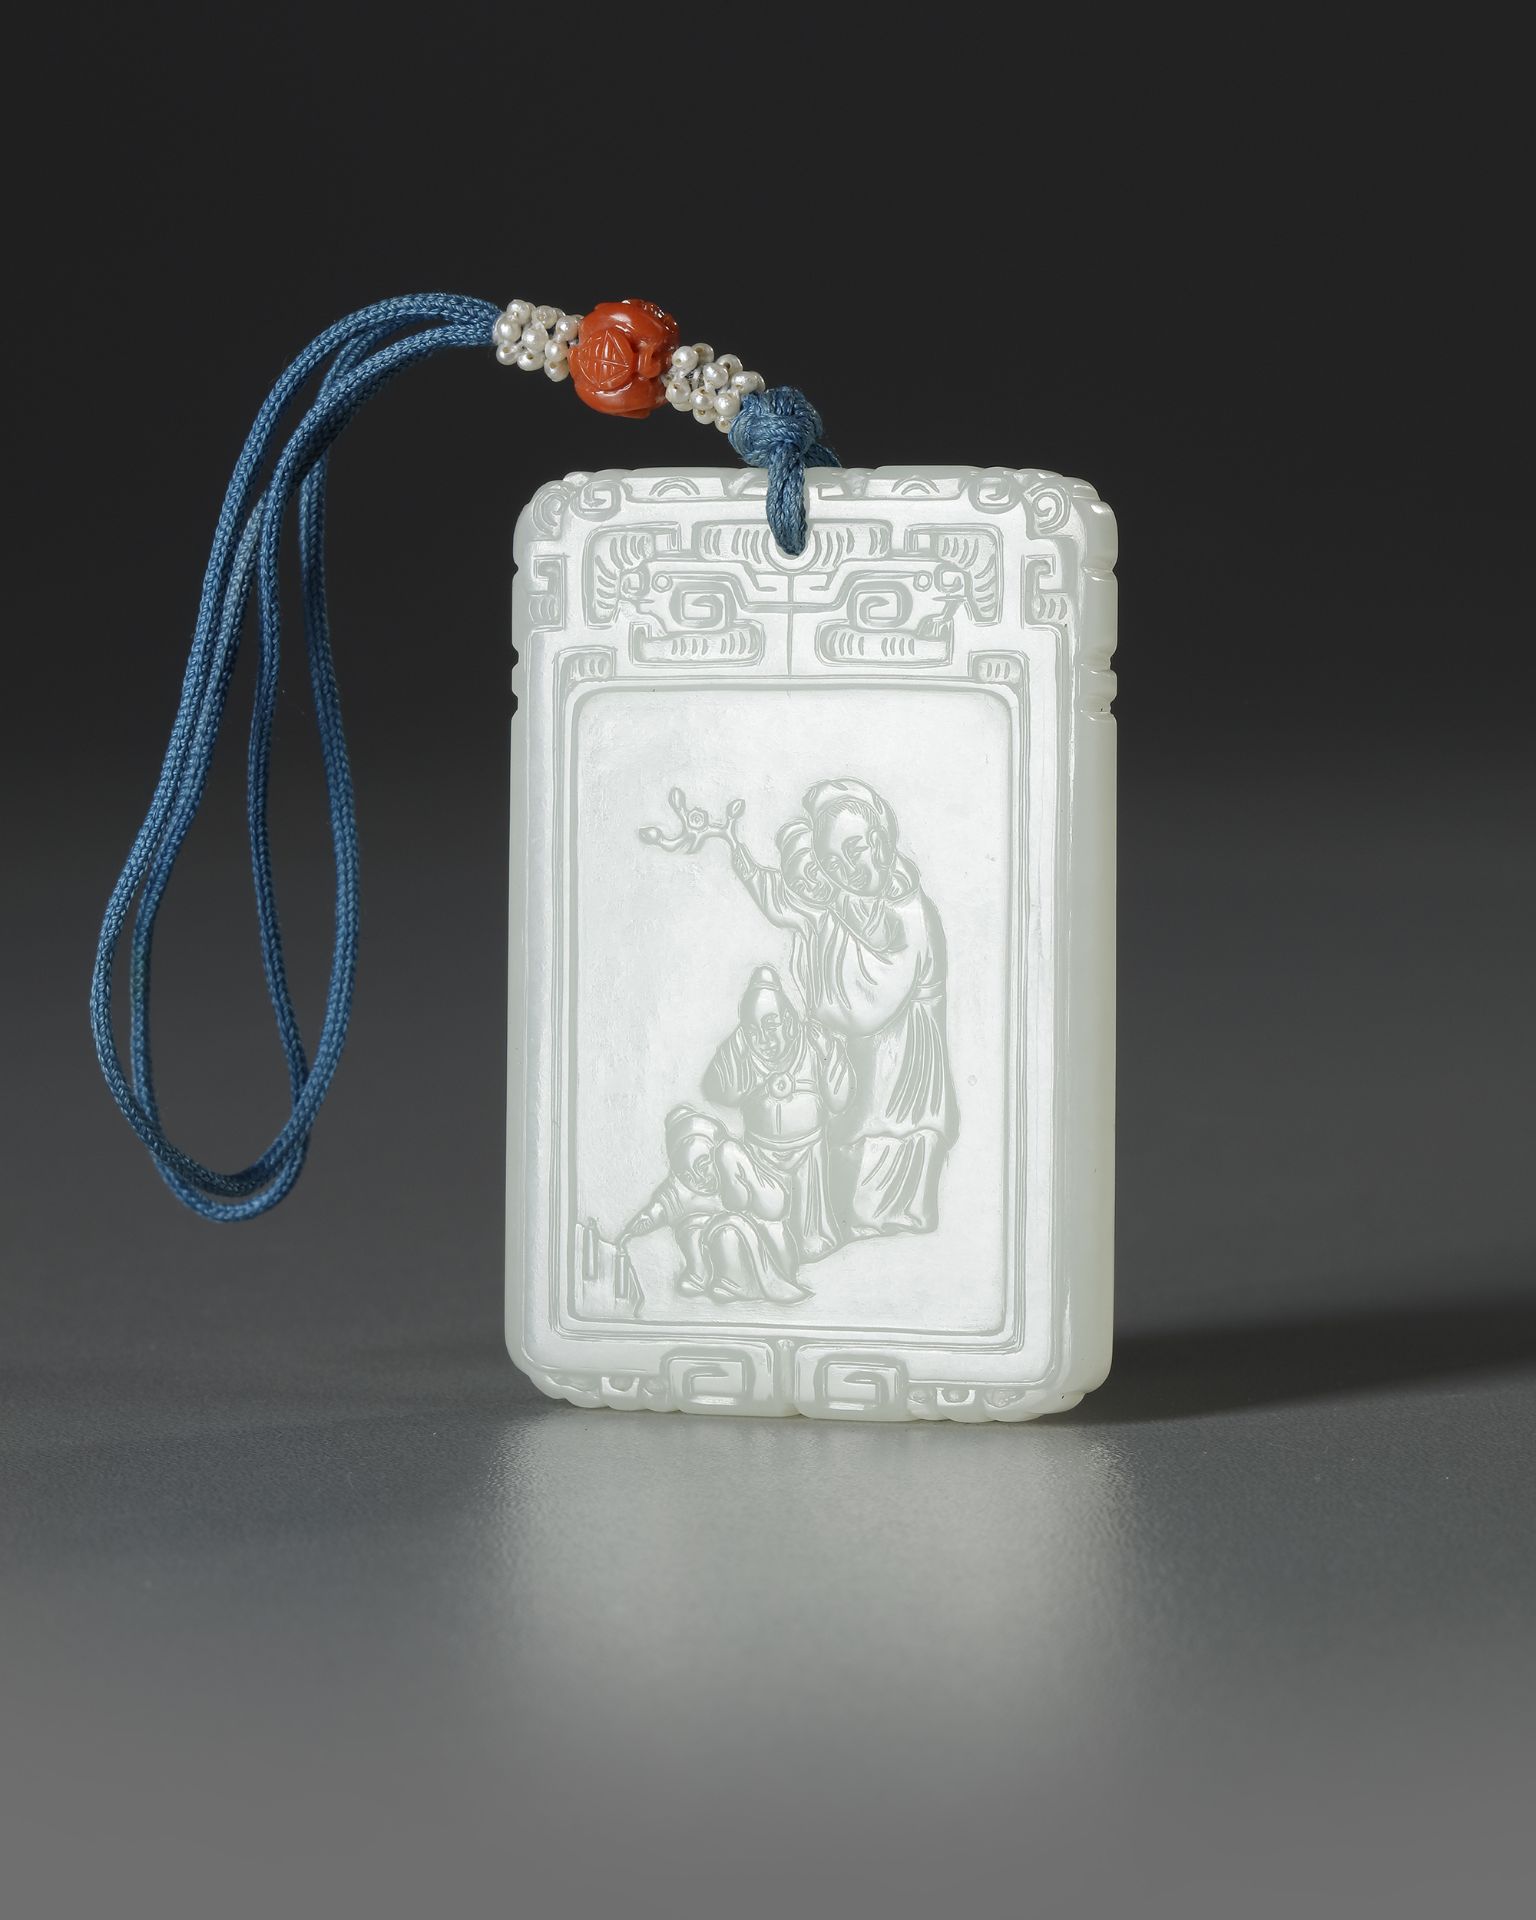 A CHINESE PALE CELADON JADE PLAQUE, QING DYNASTY (1644-1911)